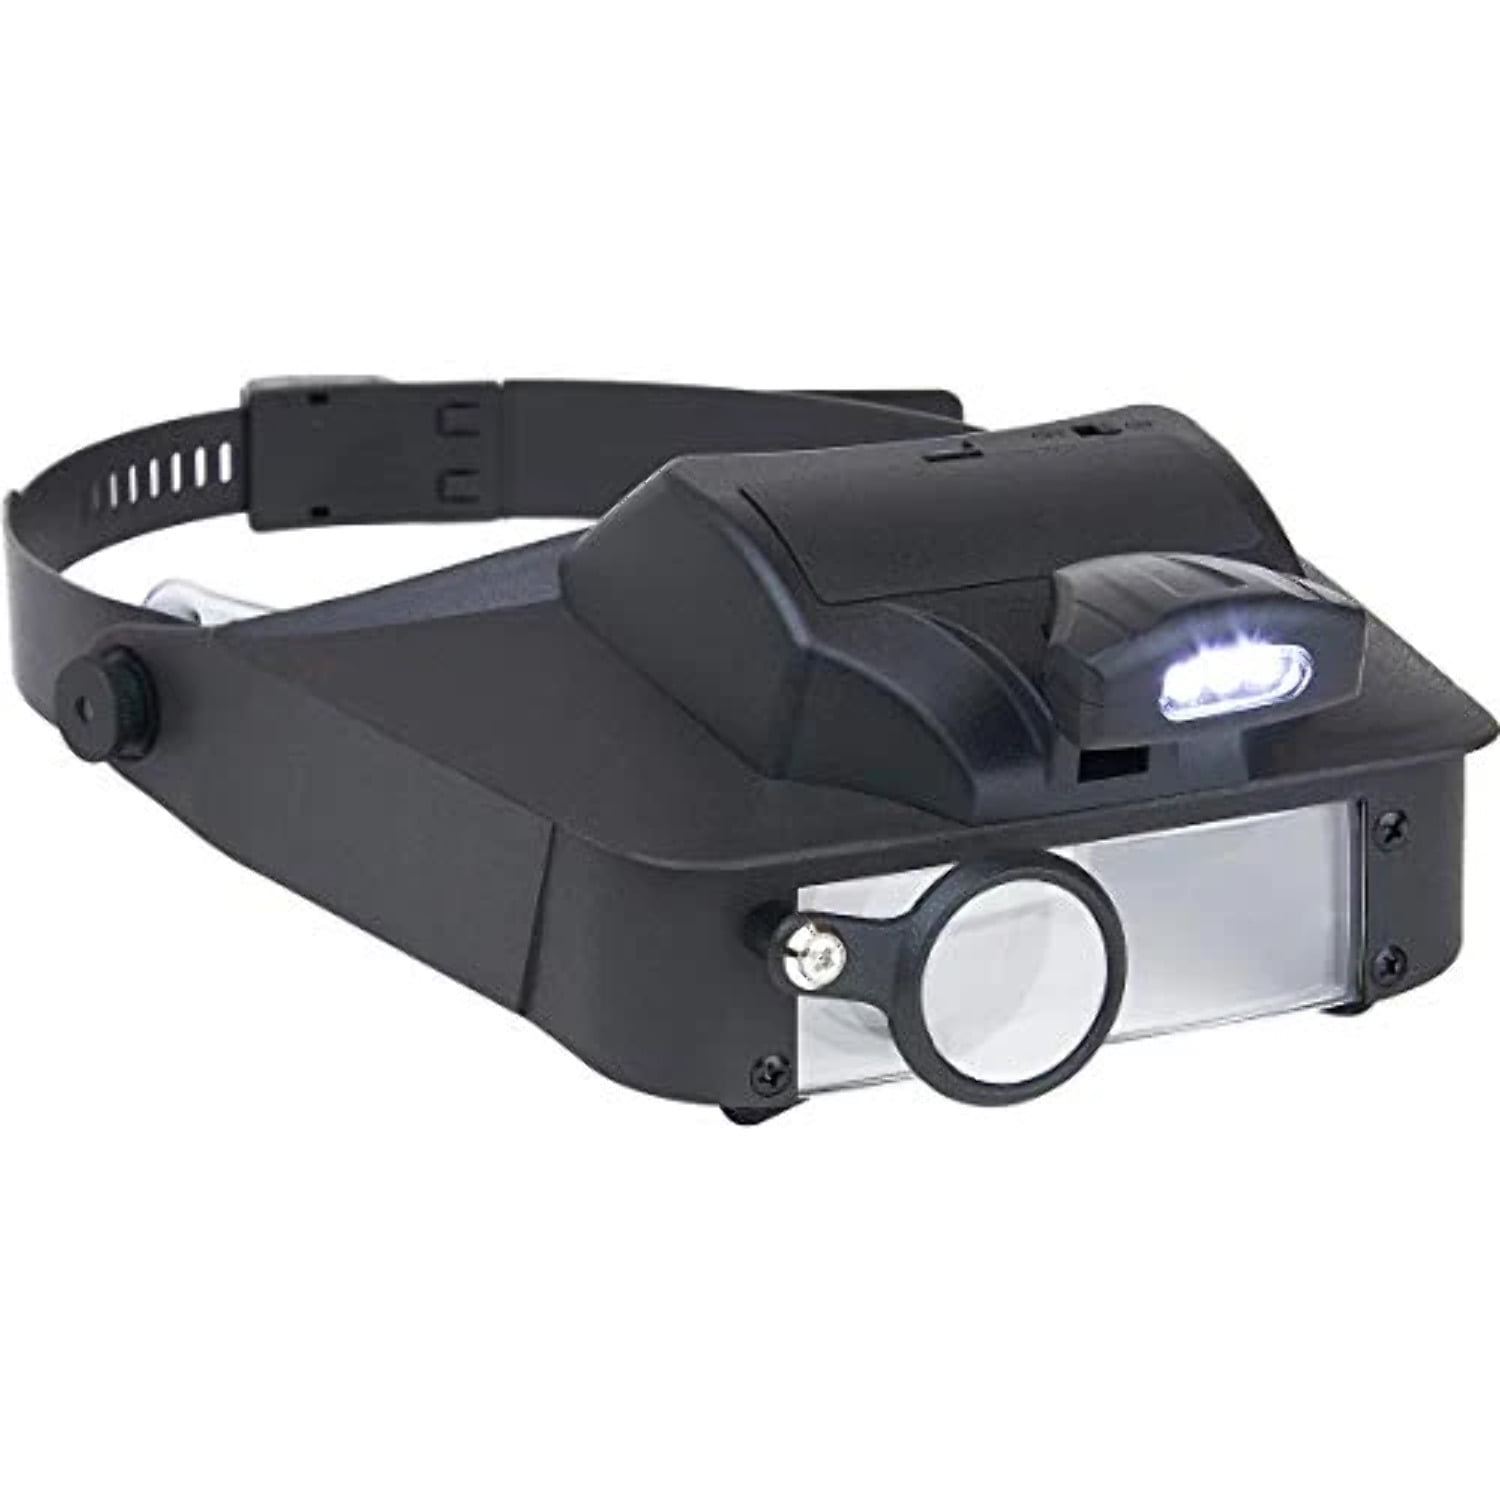 Magnifier - 2 LED Head Wearing –